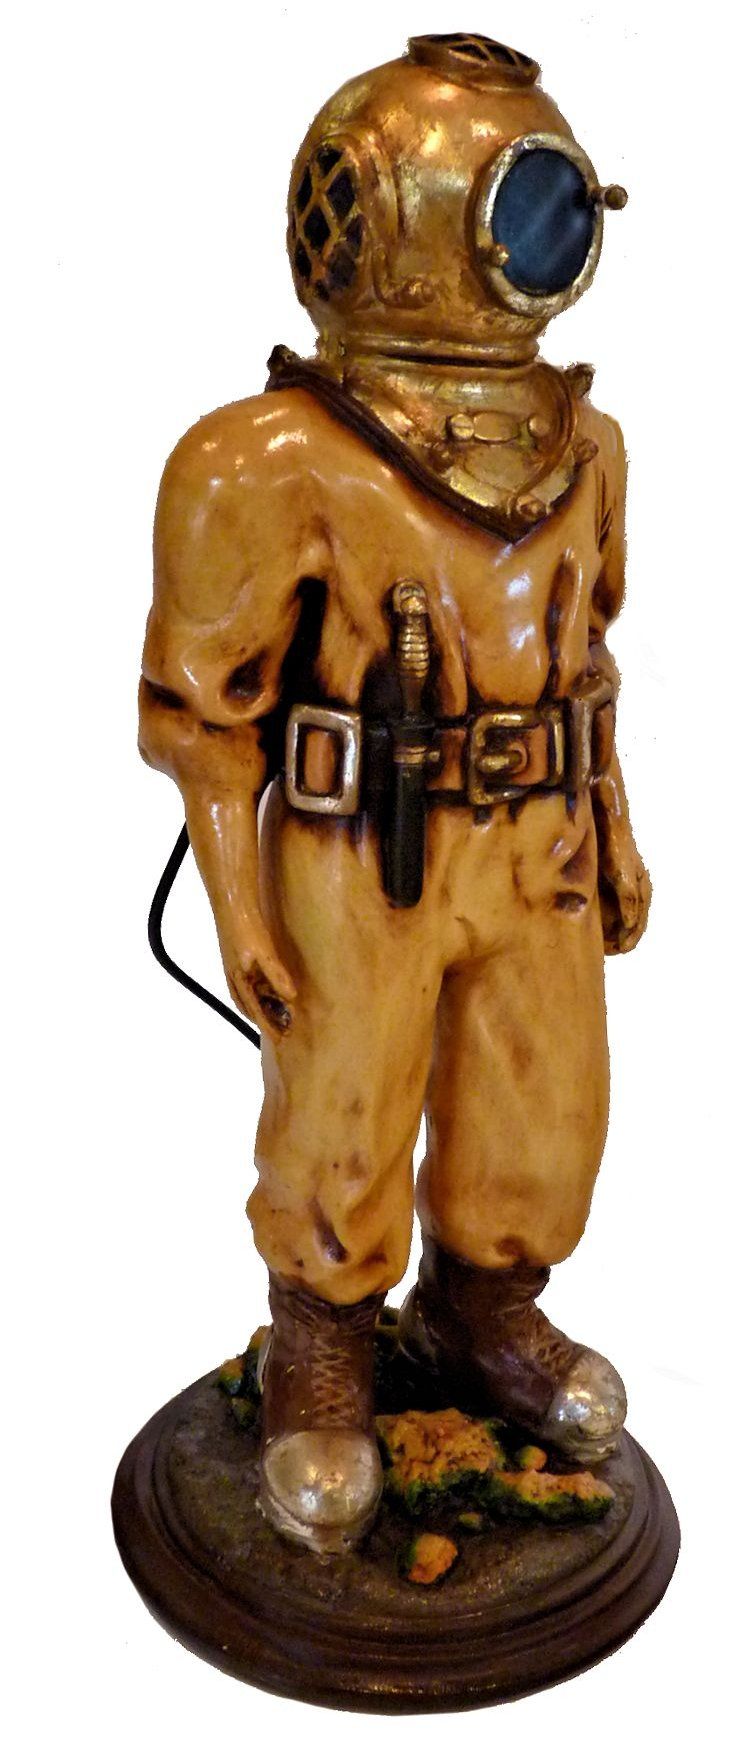 A three quarter view of the right side of the hard hat diver statue image